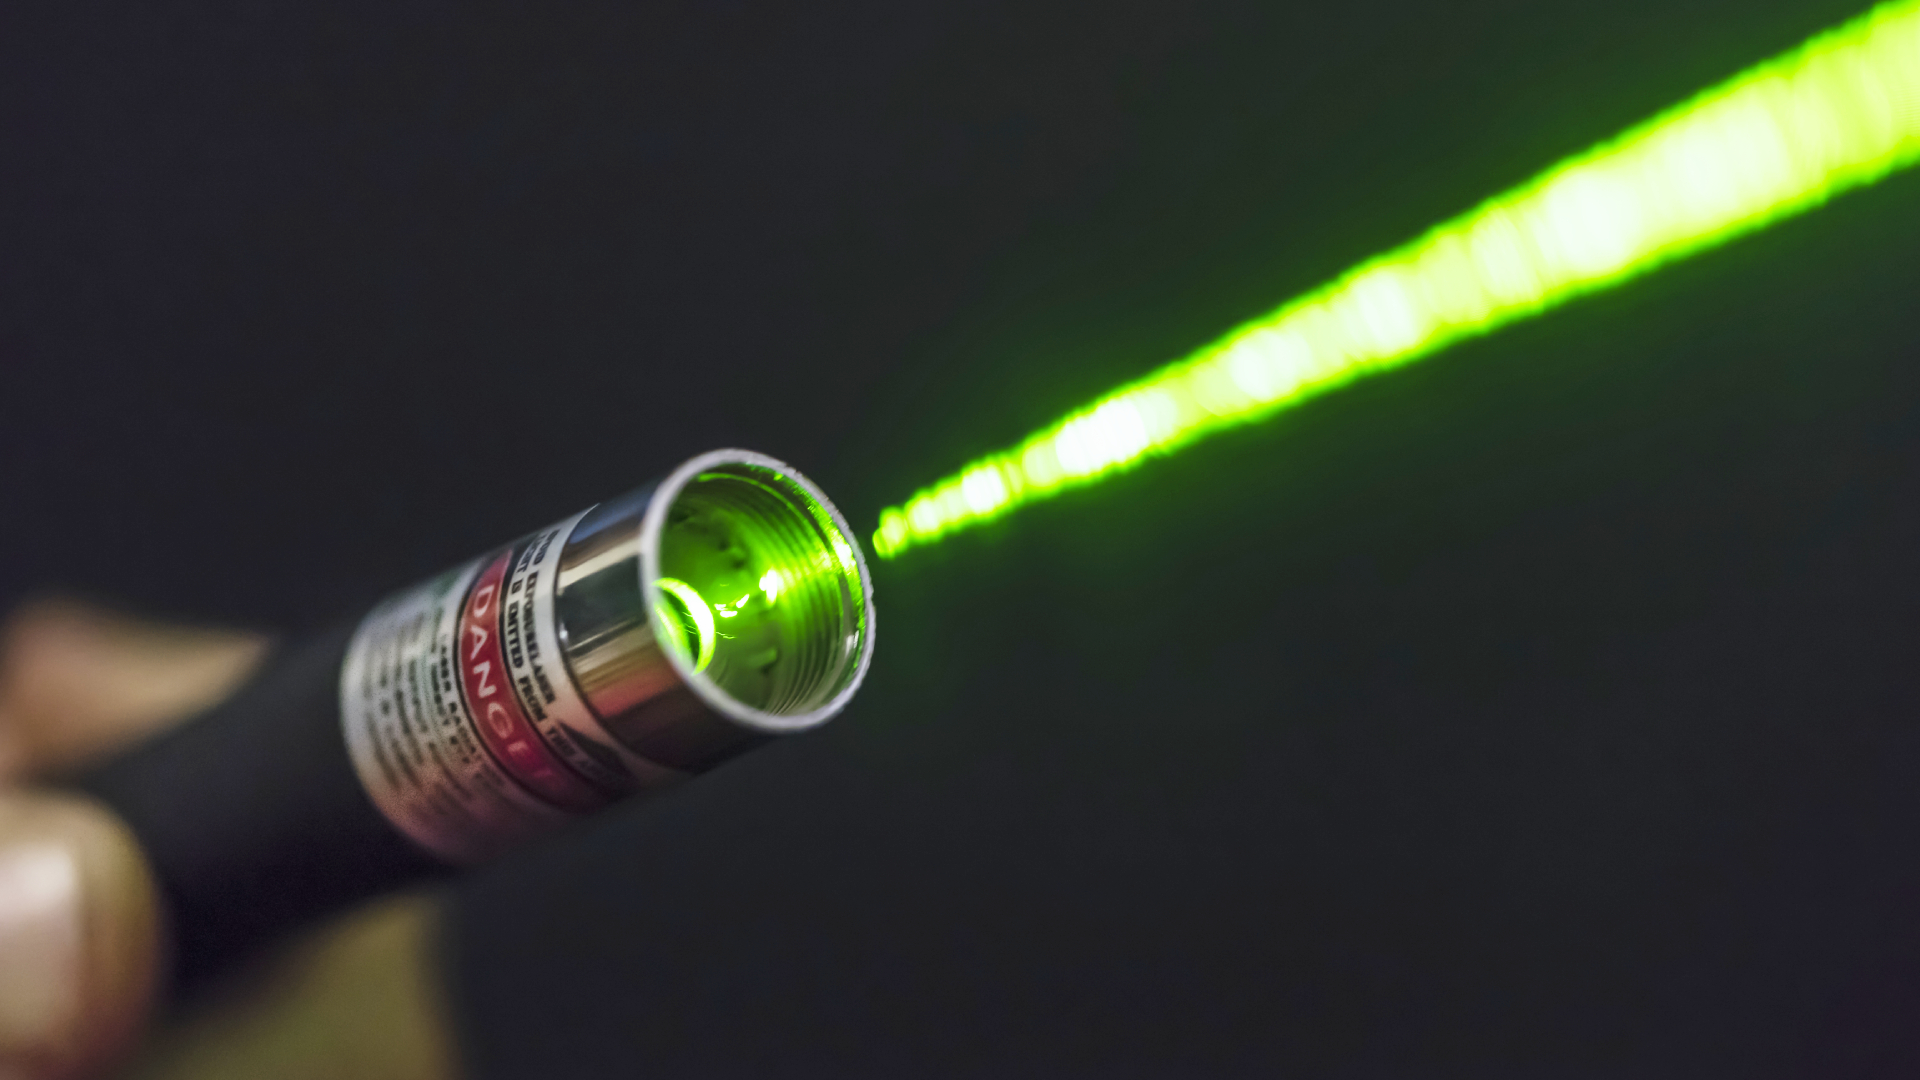  This 3D printed laser chip-hacking device uses a $20 laser pointer, costs $500 to build, and was developed so that 'people can do this in their homes' 